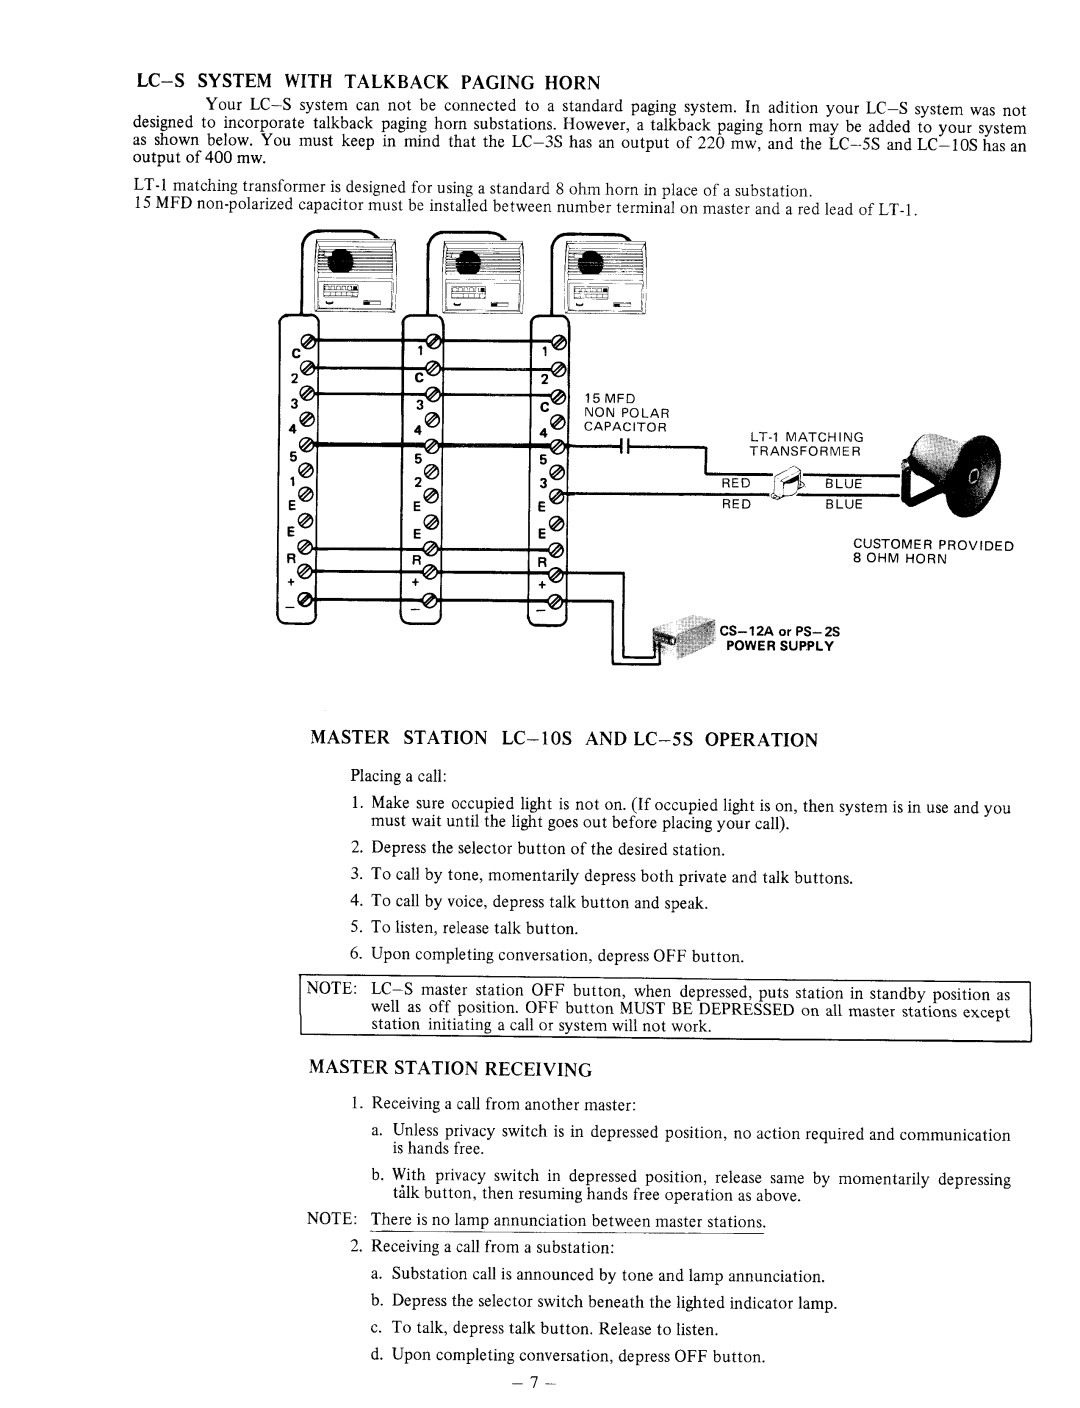 Aiphone Model LC-3S manual 